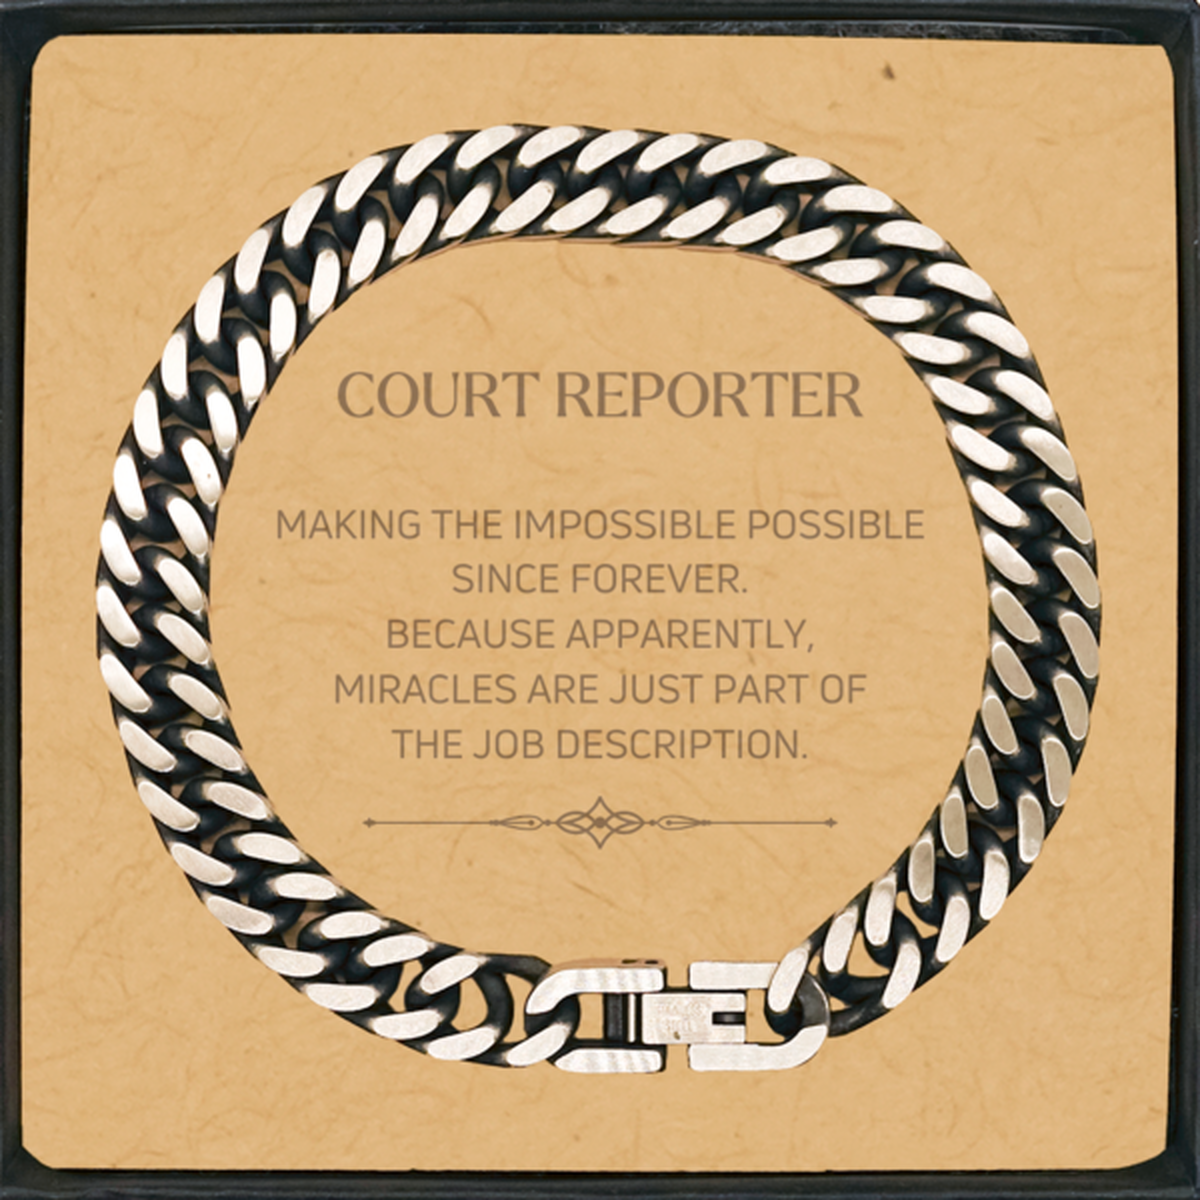 Funny Court Reporter Gifts, Miracles are just part of the job description, Inspirational Birthday Cuban Link Chain Bracelet For Court Reporter, Men, Women, Coworkers, Friends, Boss